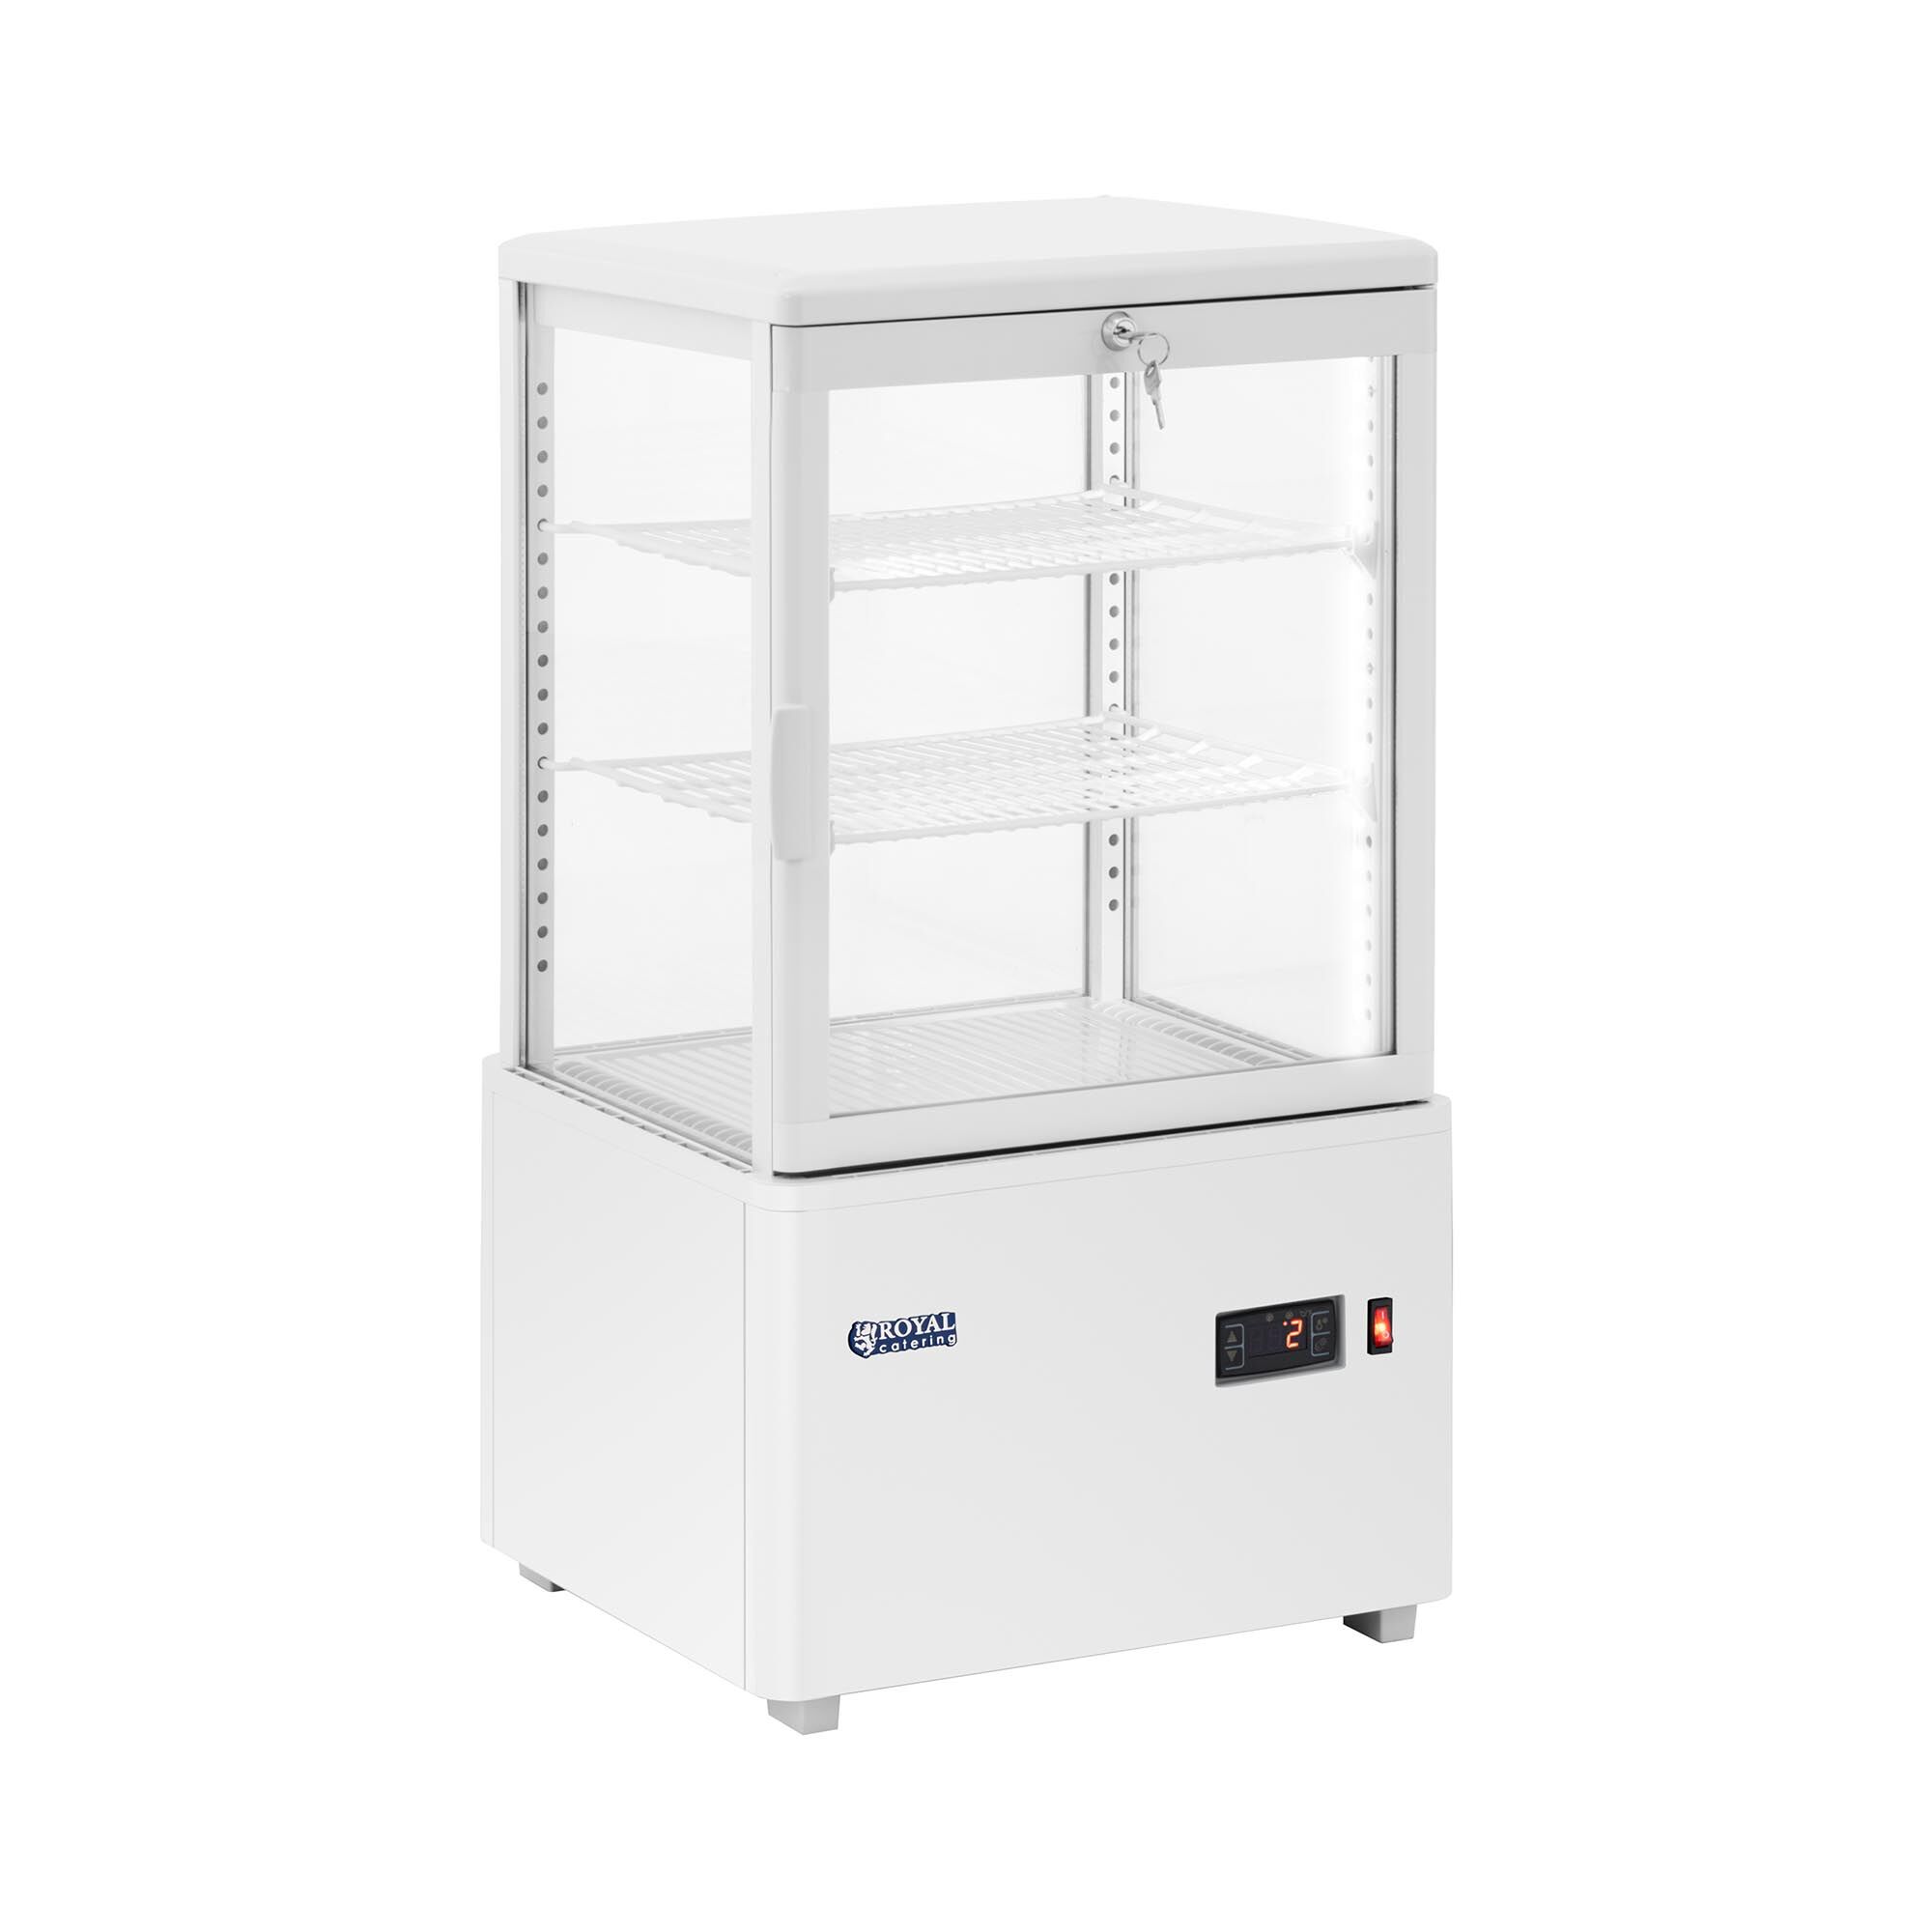 Royal Catering Refrigerated Display Case - 58 L - Royal Catering - 3 levels - White - lockable